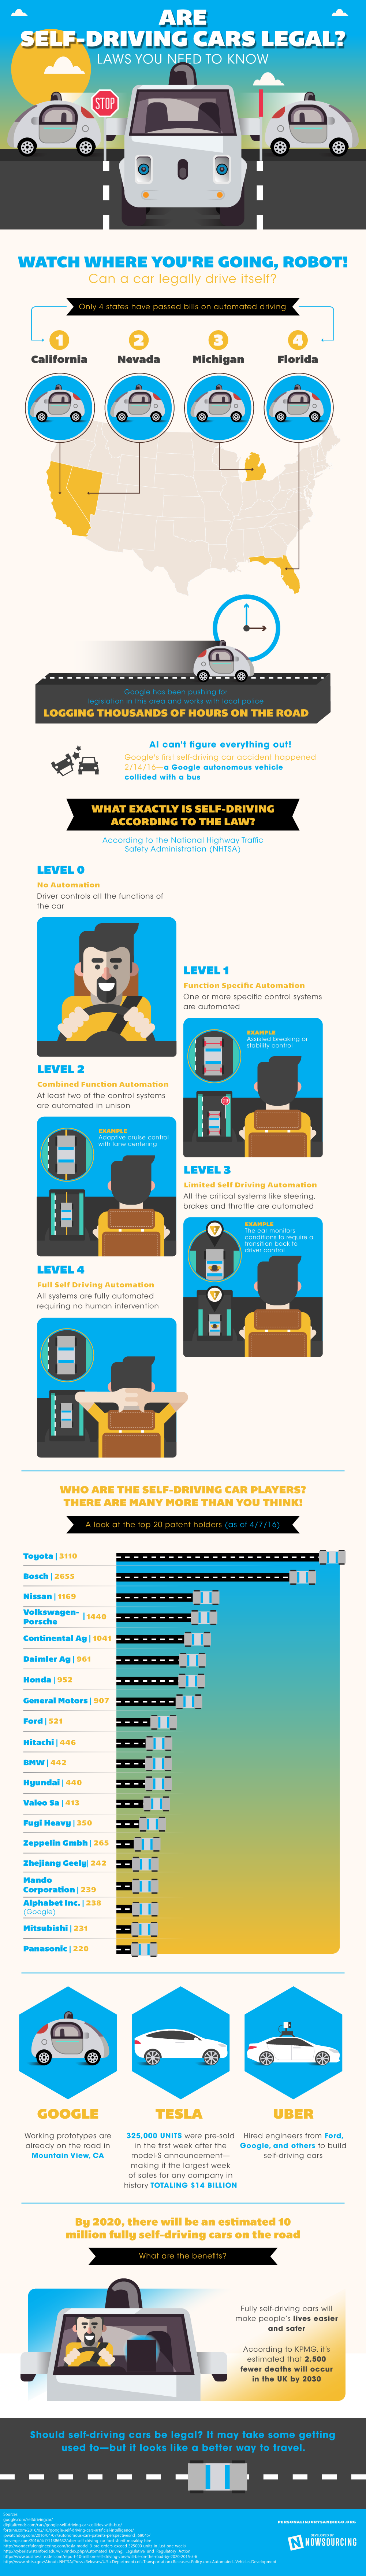 self-driving cars infographic robot get out of my way